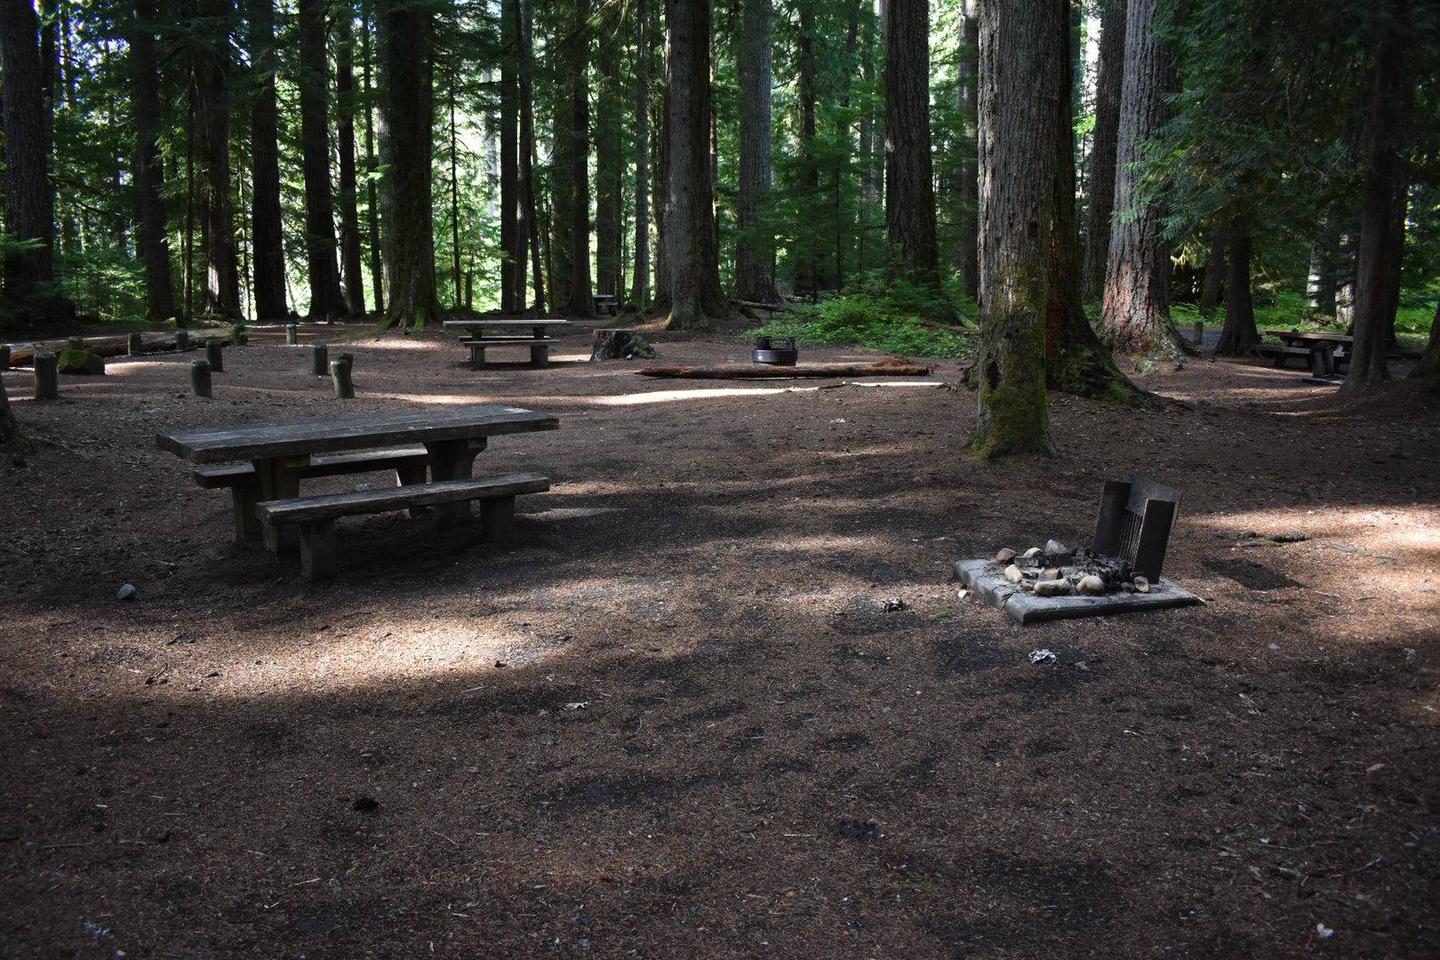 Campers are provided with a picnic table and a fire pit.